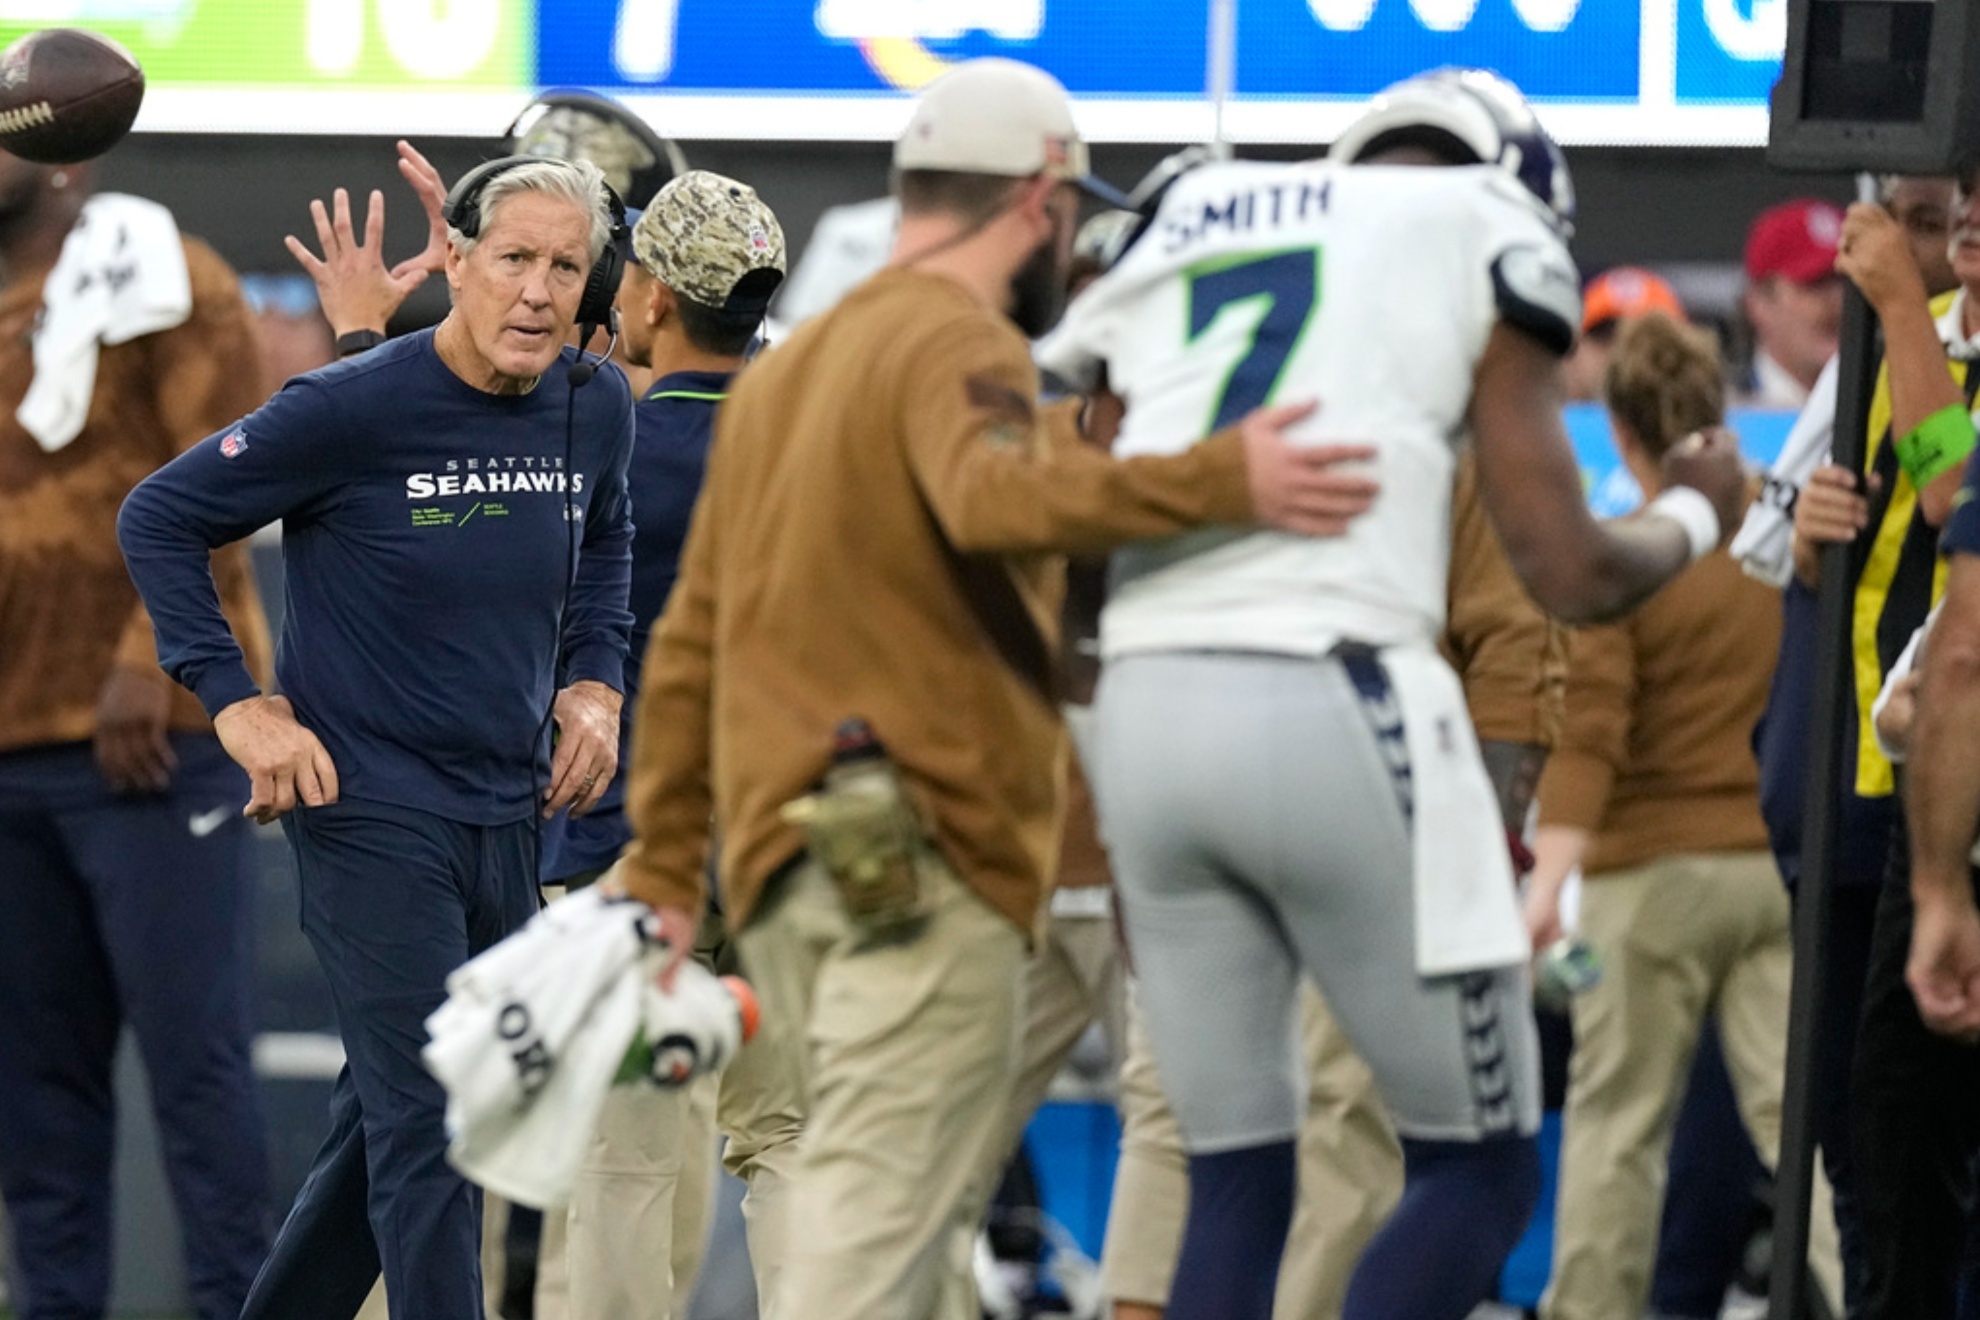 Pete Carroll watches worriedly as Geno Smith goes off injured.